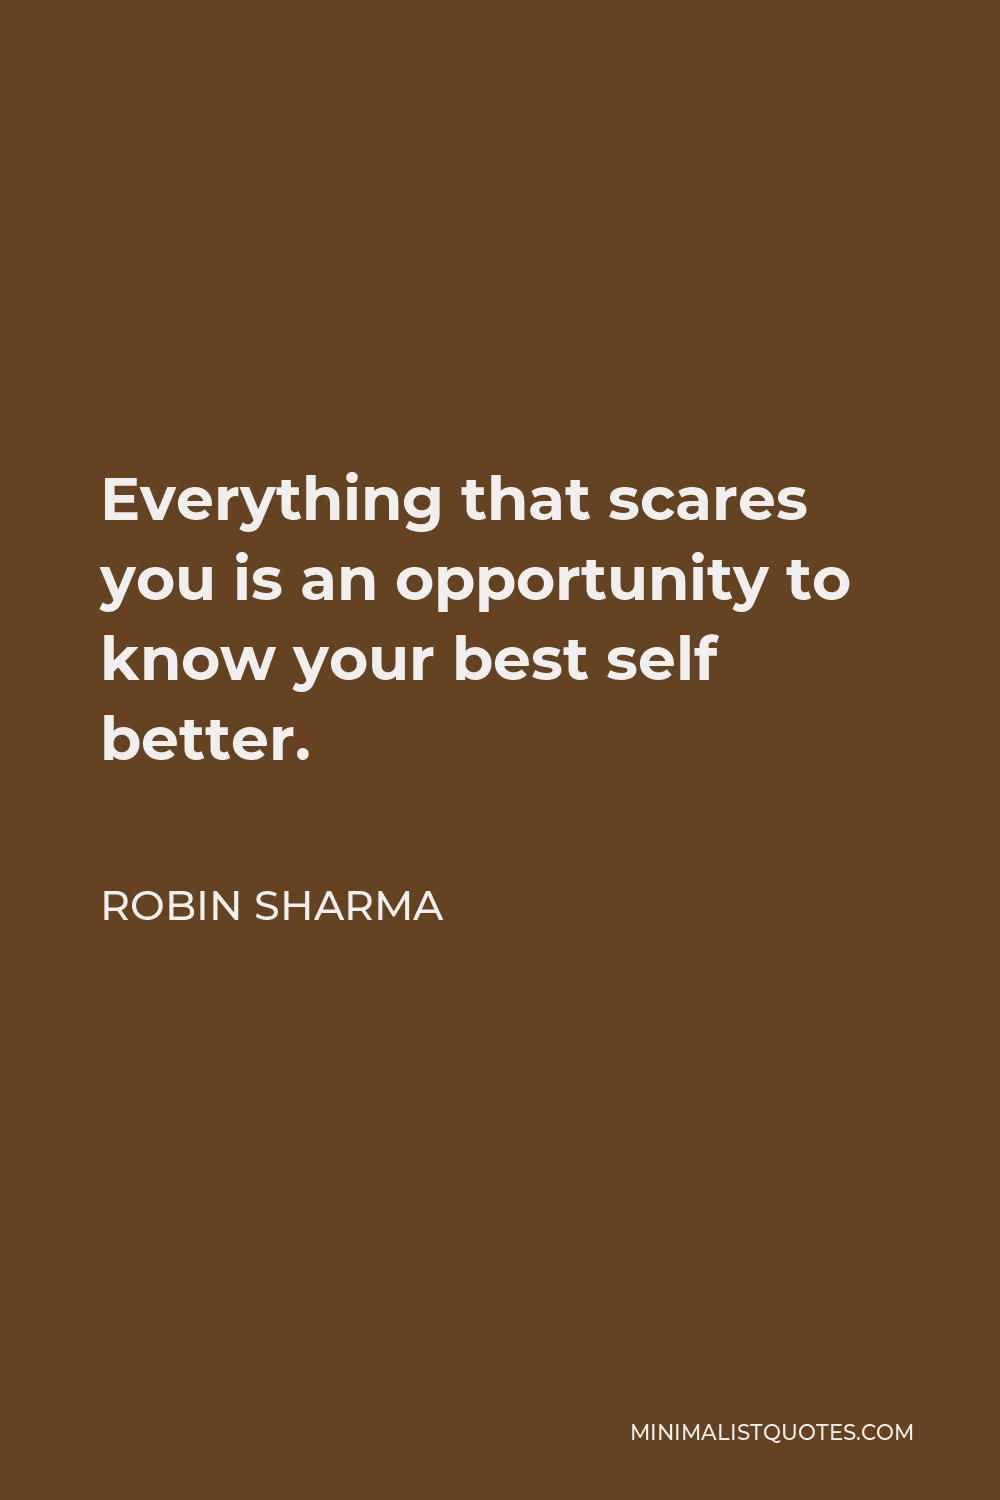 Robin Sharma Quote - Everything that scares you is an opportunity to know your best self better.